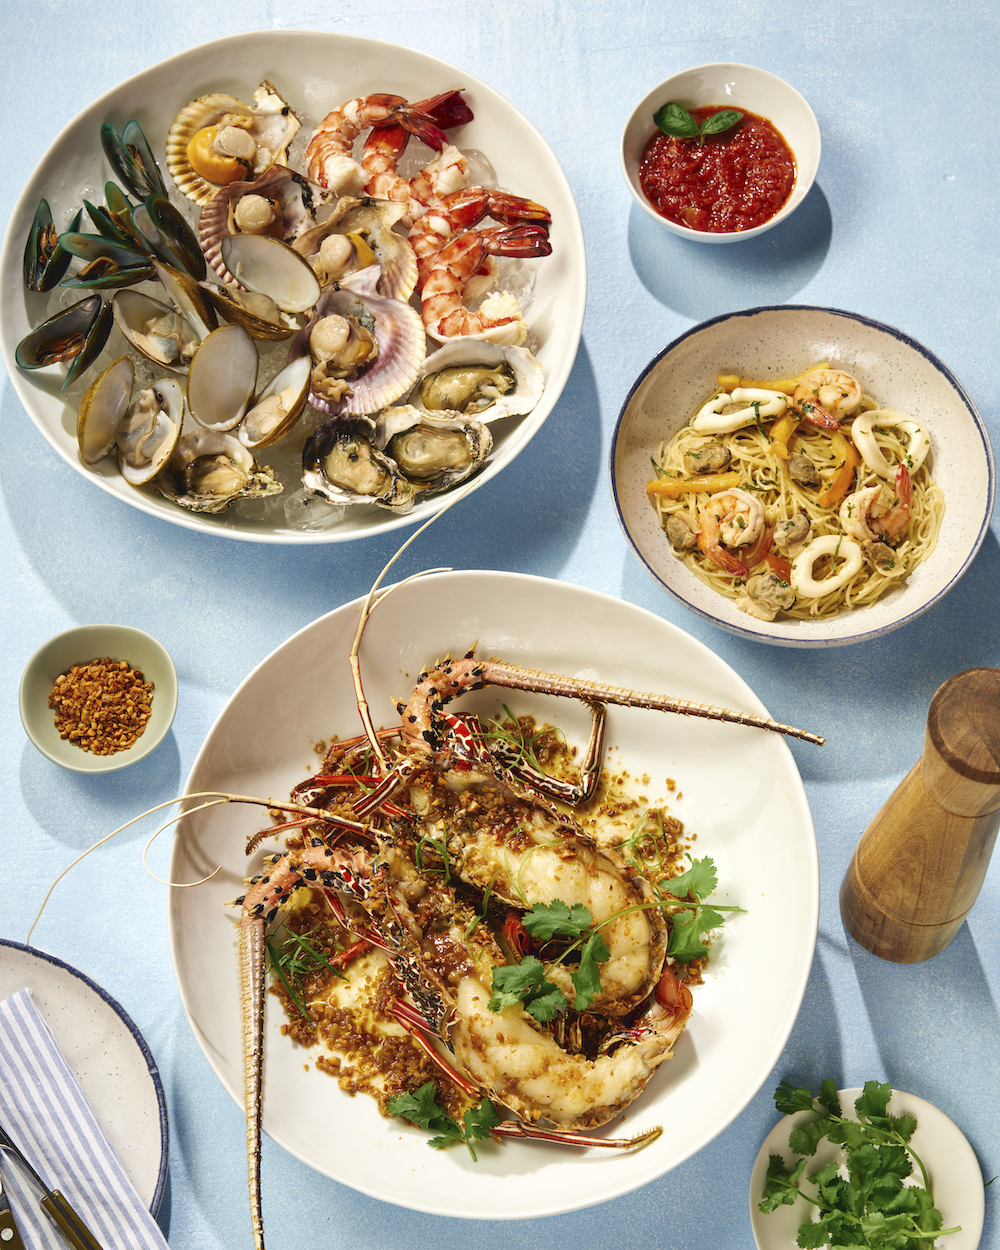 Grilled lobster, seafood cocktail, and seafood cappellini